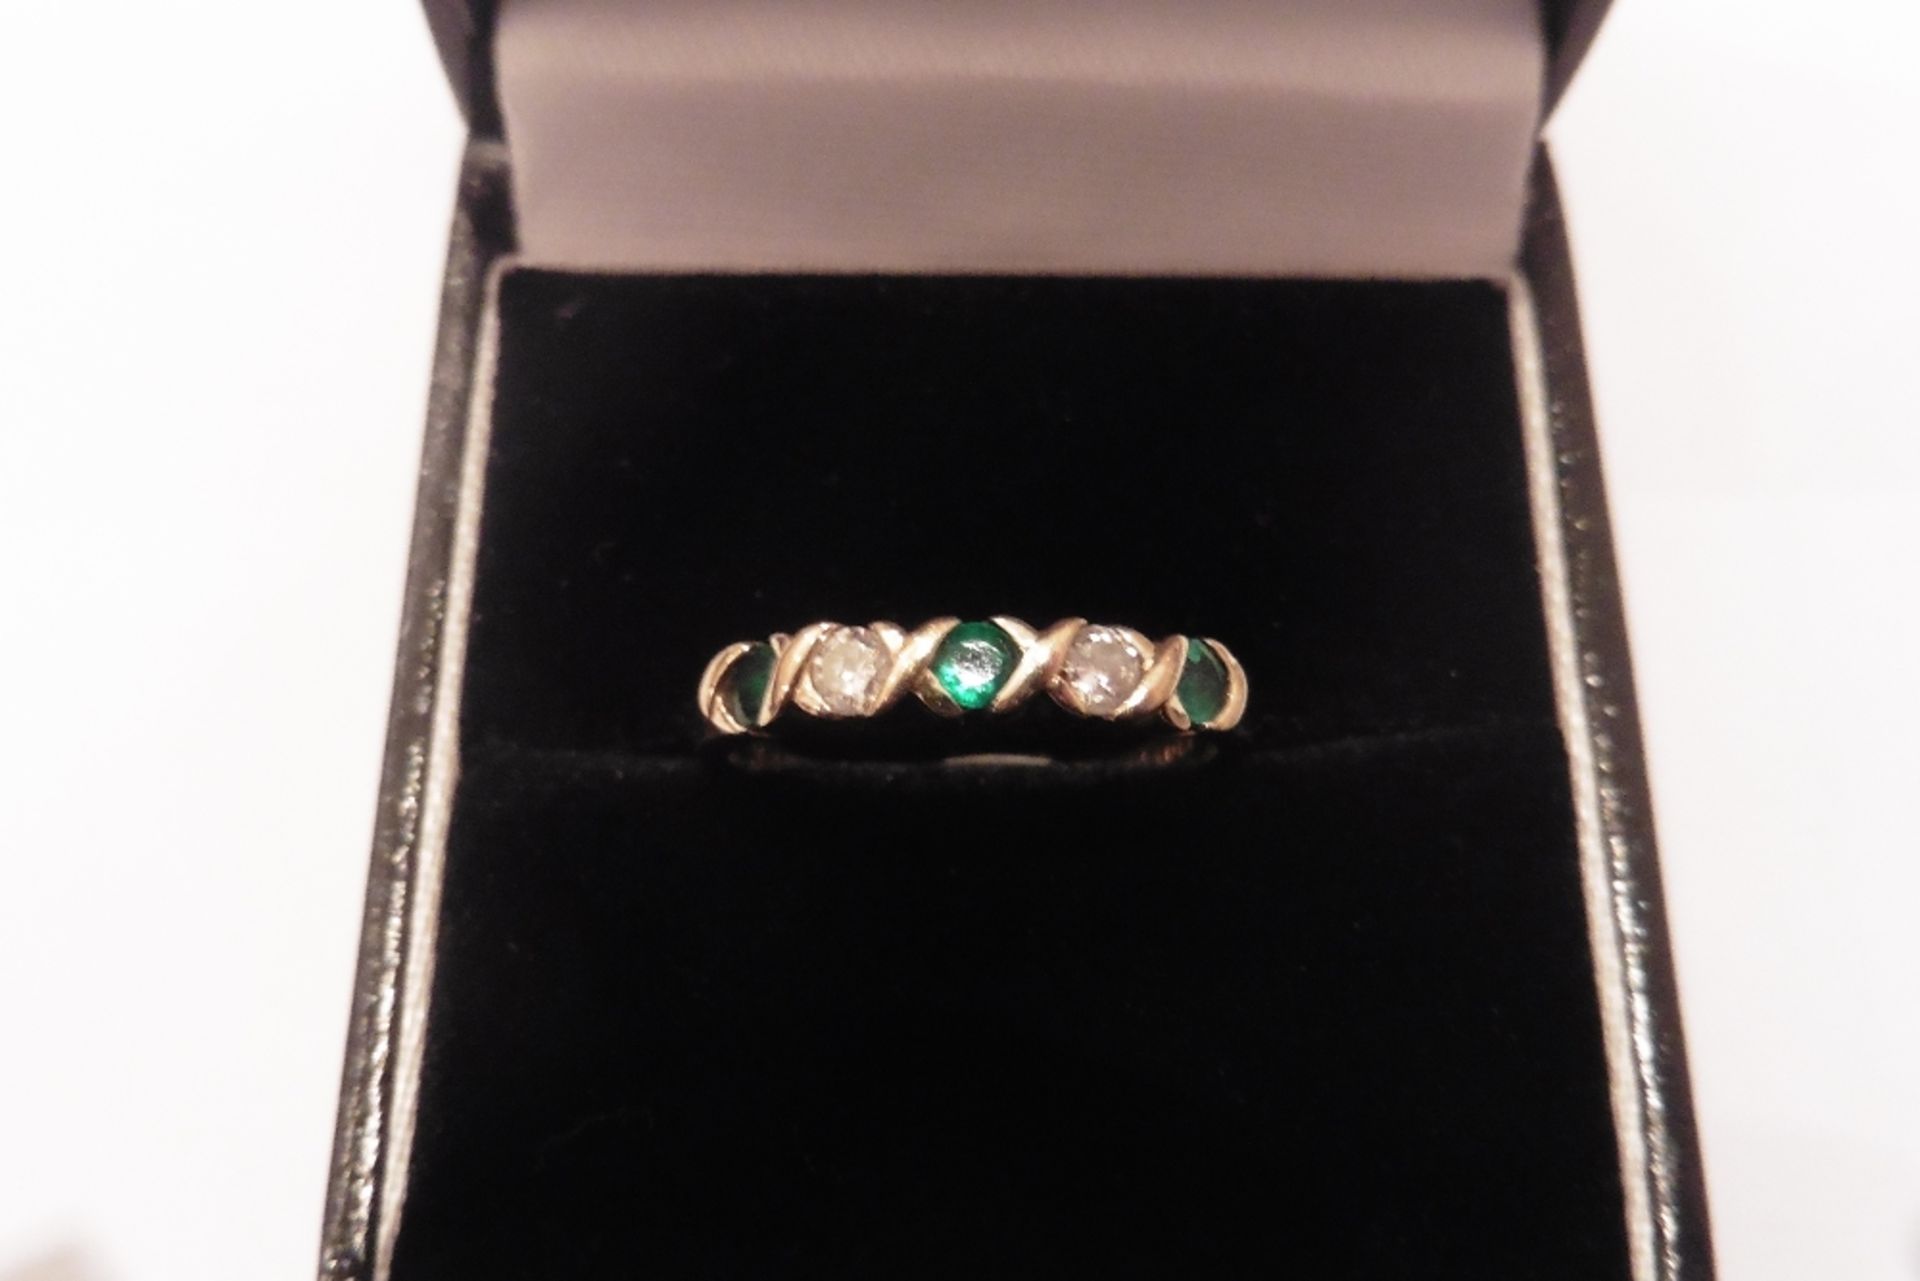 Pre-owned 9ct yellow gold emerald and diamond eternity style ring set with 3 round cut emeralds and